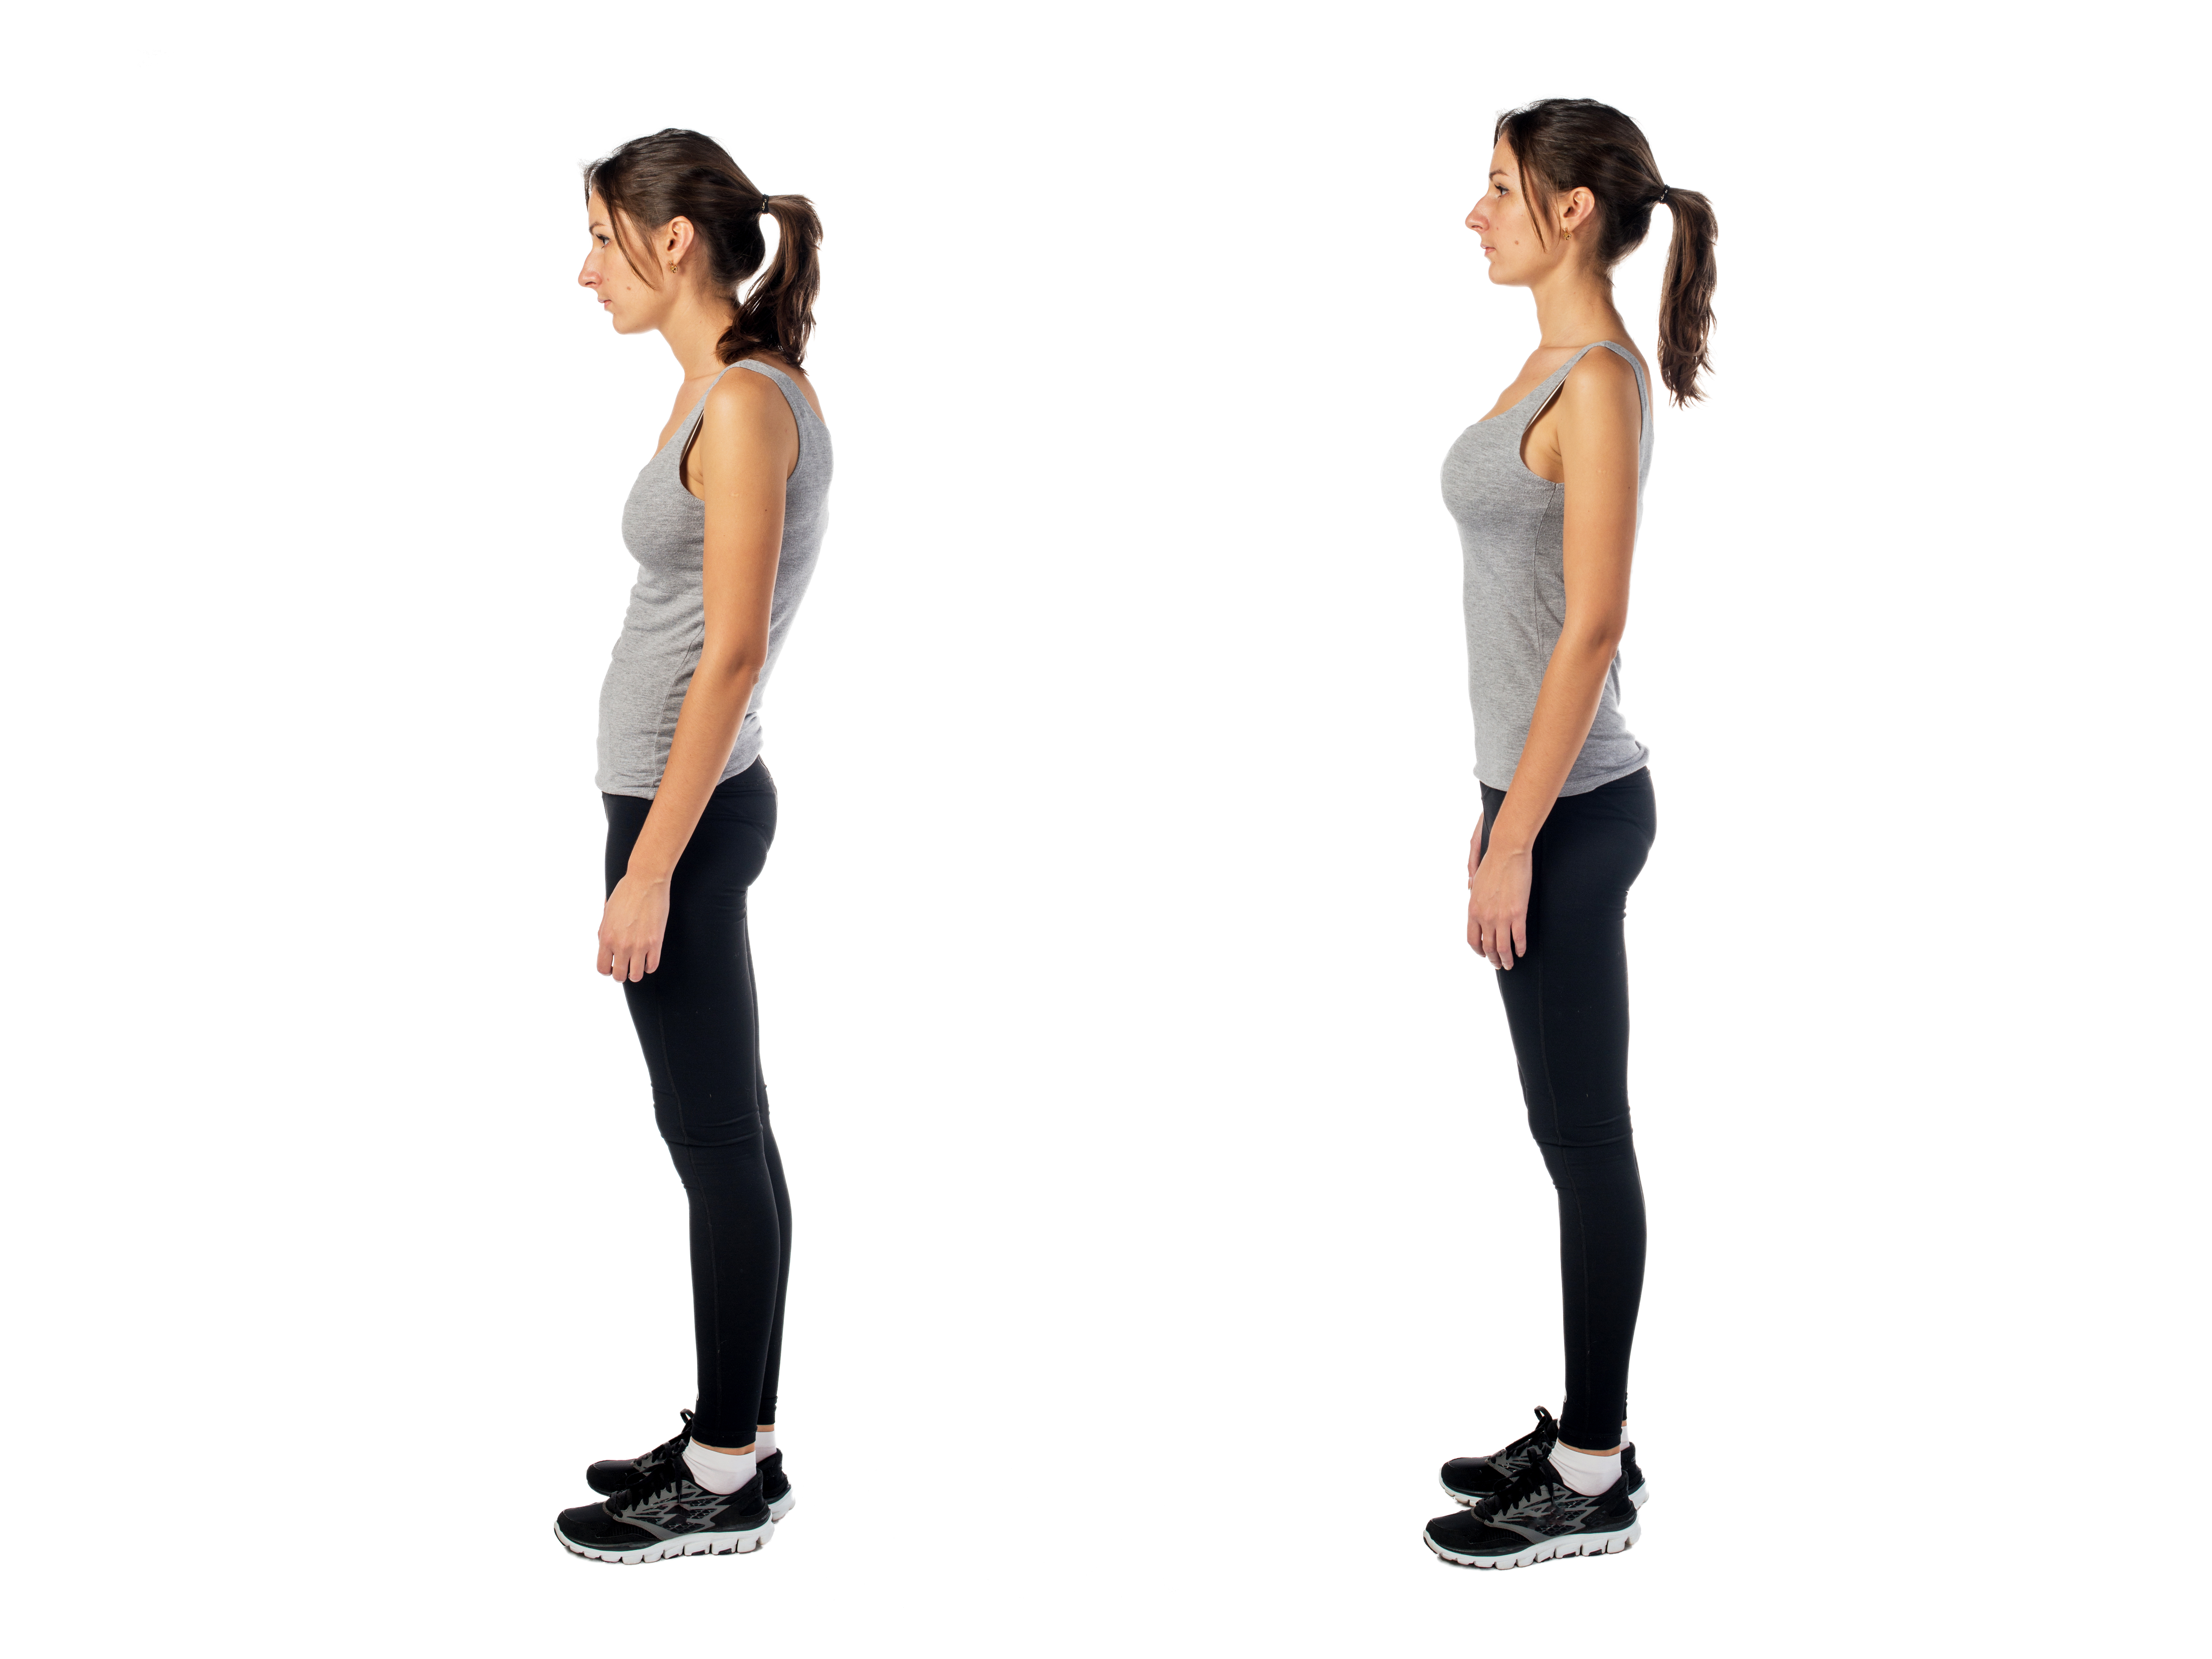 Exercise to improve posture.